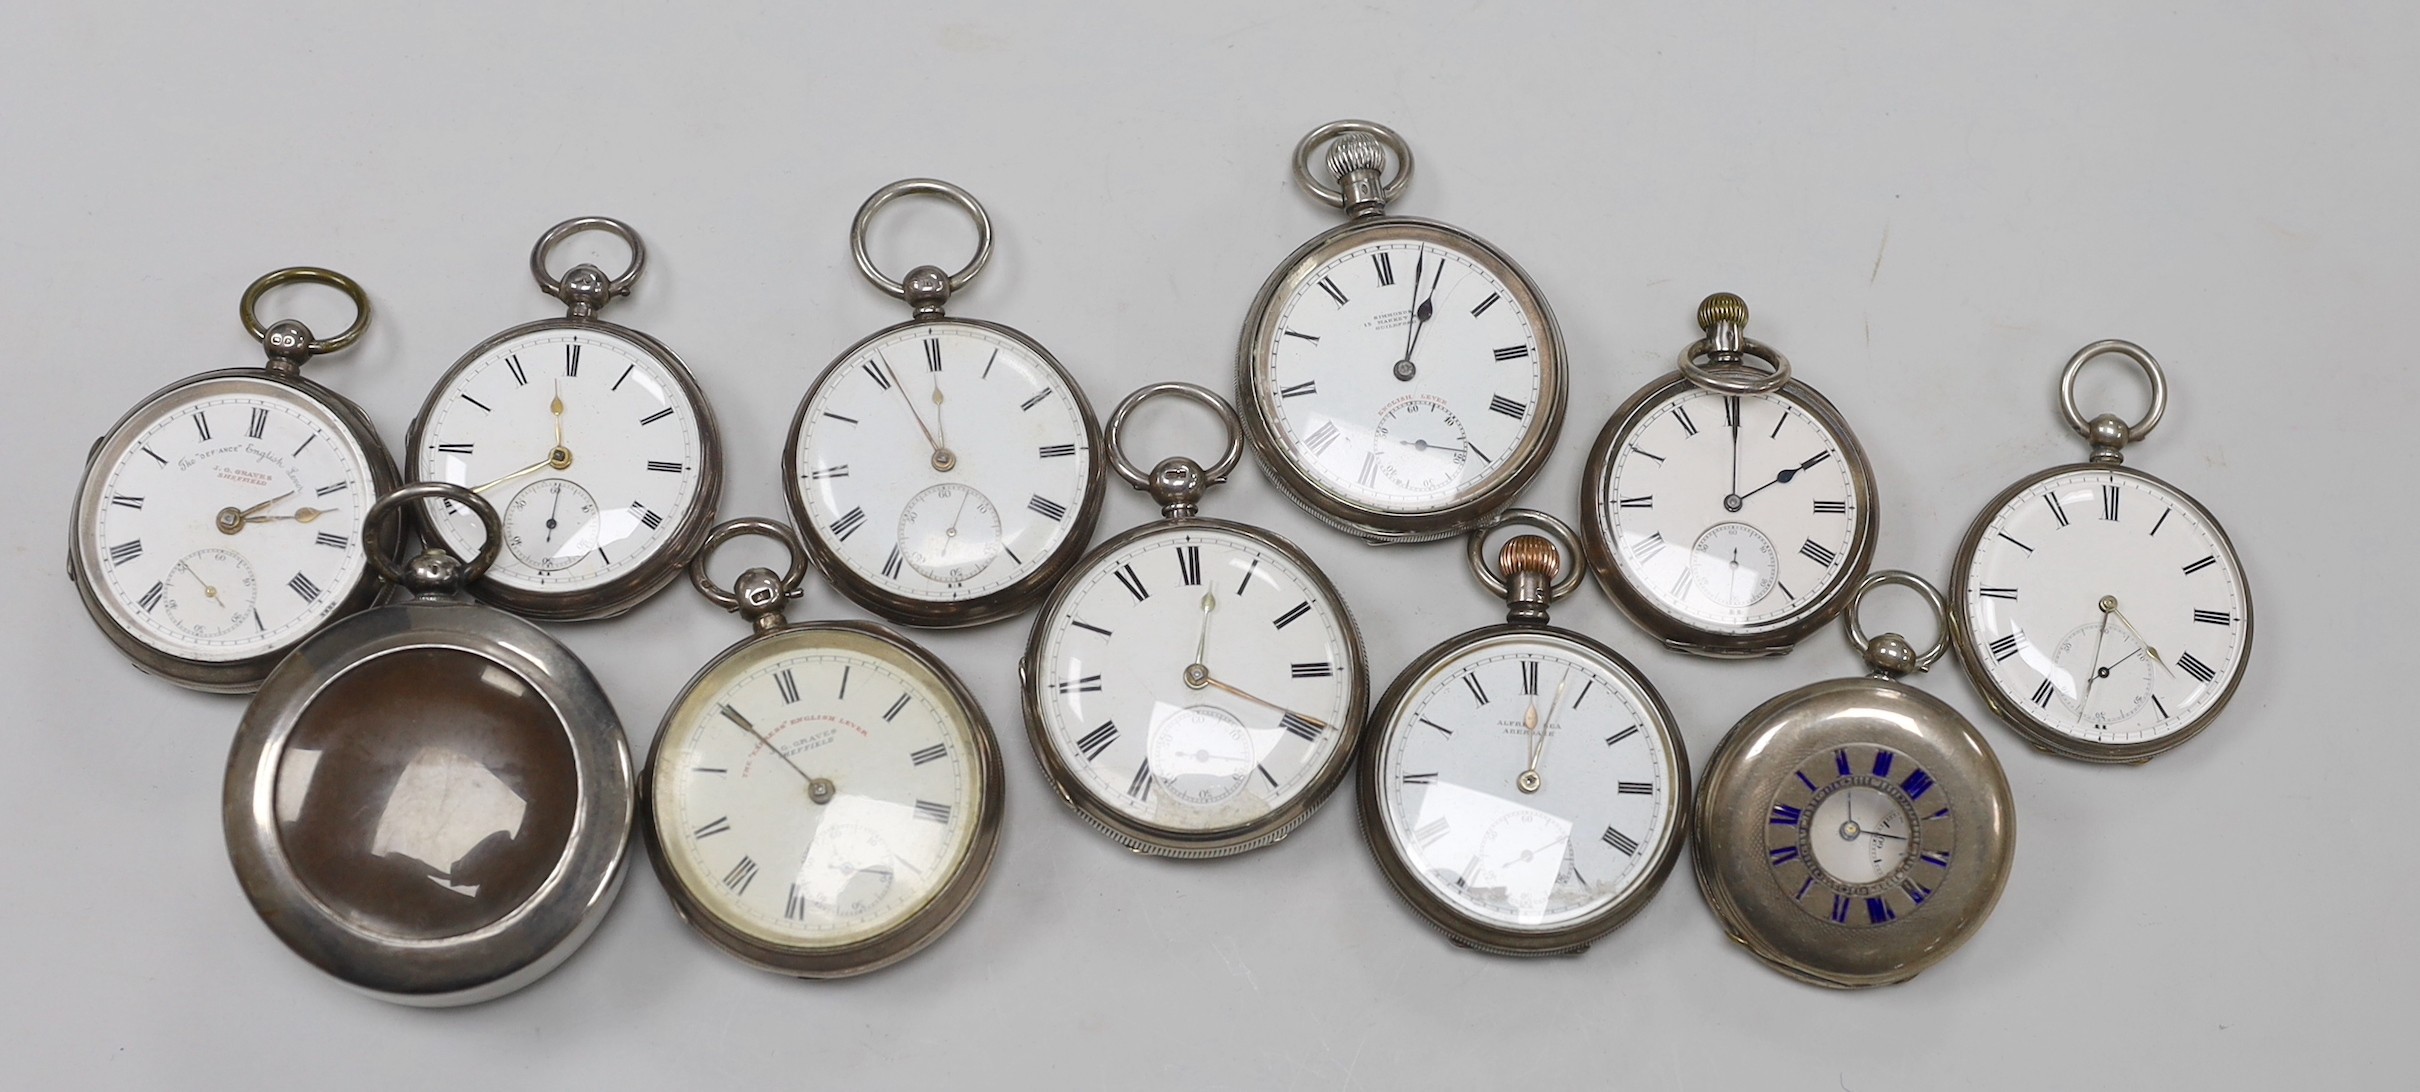 Eleven assorted Victorian and later silver or white metal pocket watches, including The Defiance English Lever, retailed by Graves of Sheffield and Joseph Taylor of Pontefract.